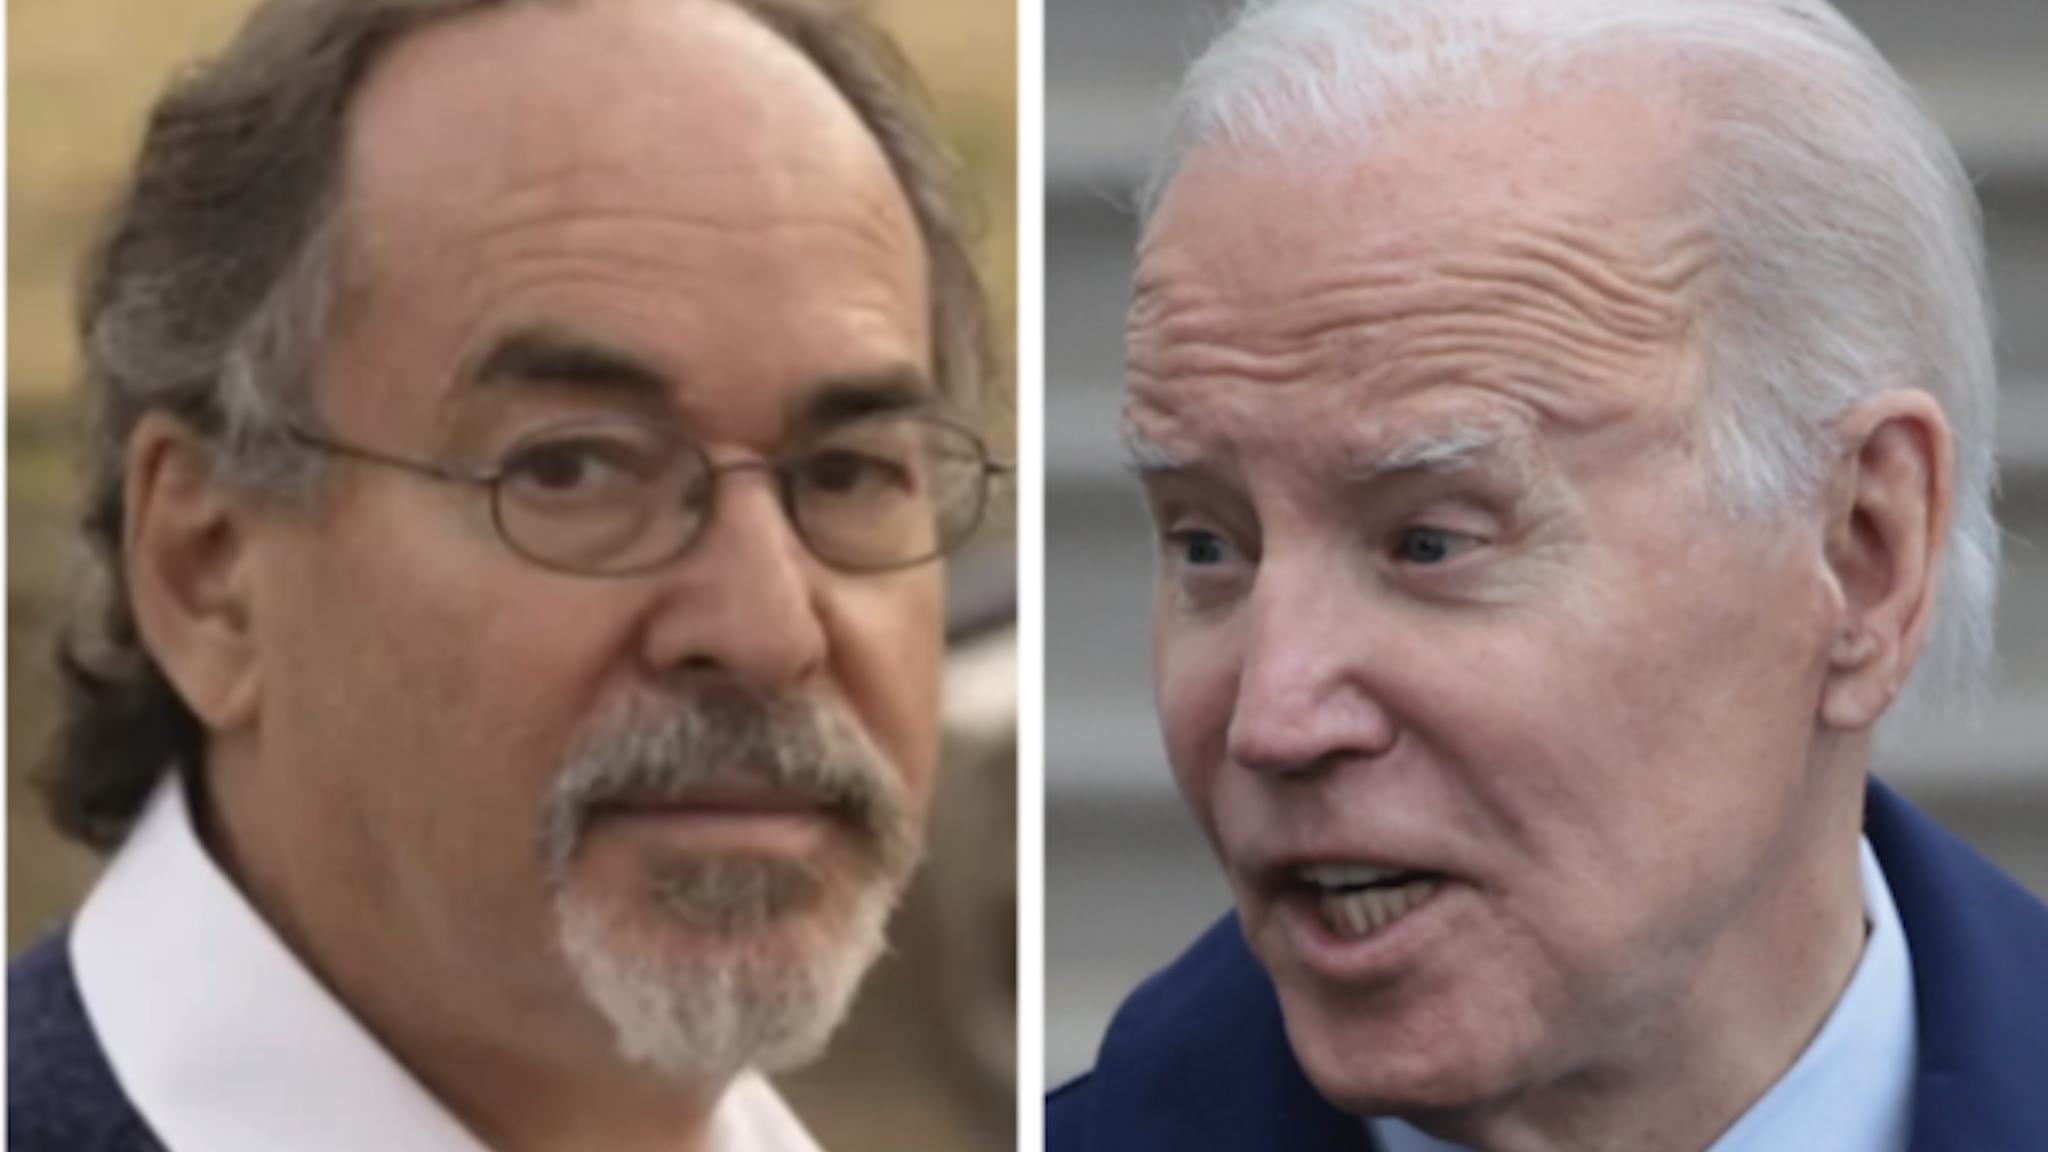 Conservative publisher David Horowitz deemed President Joe Biden guilty of treason in a scathing new column on his FrontPageMag.com news site.